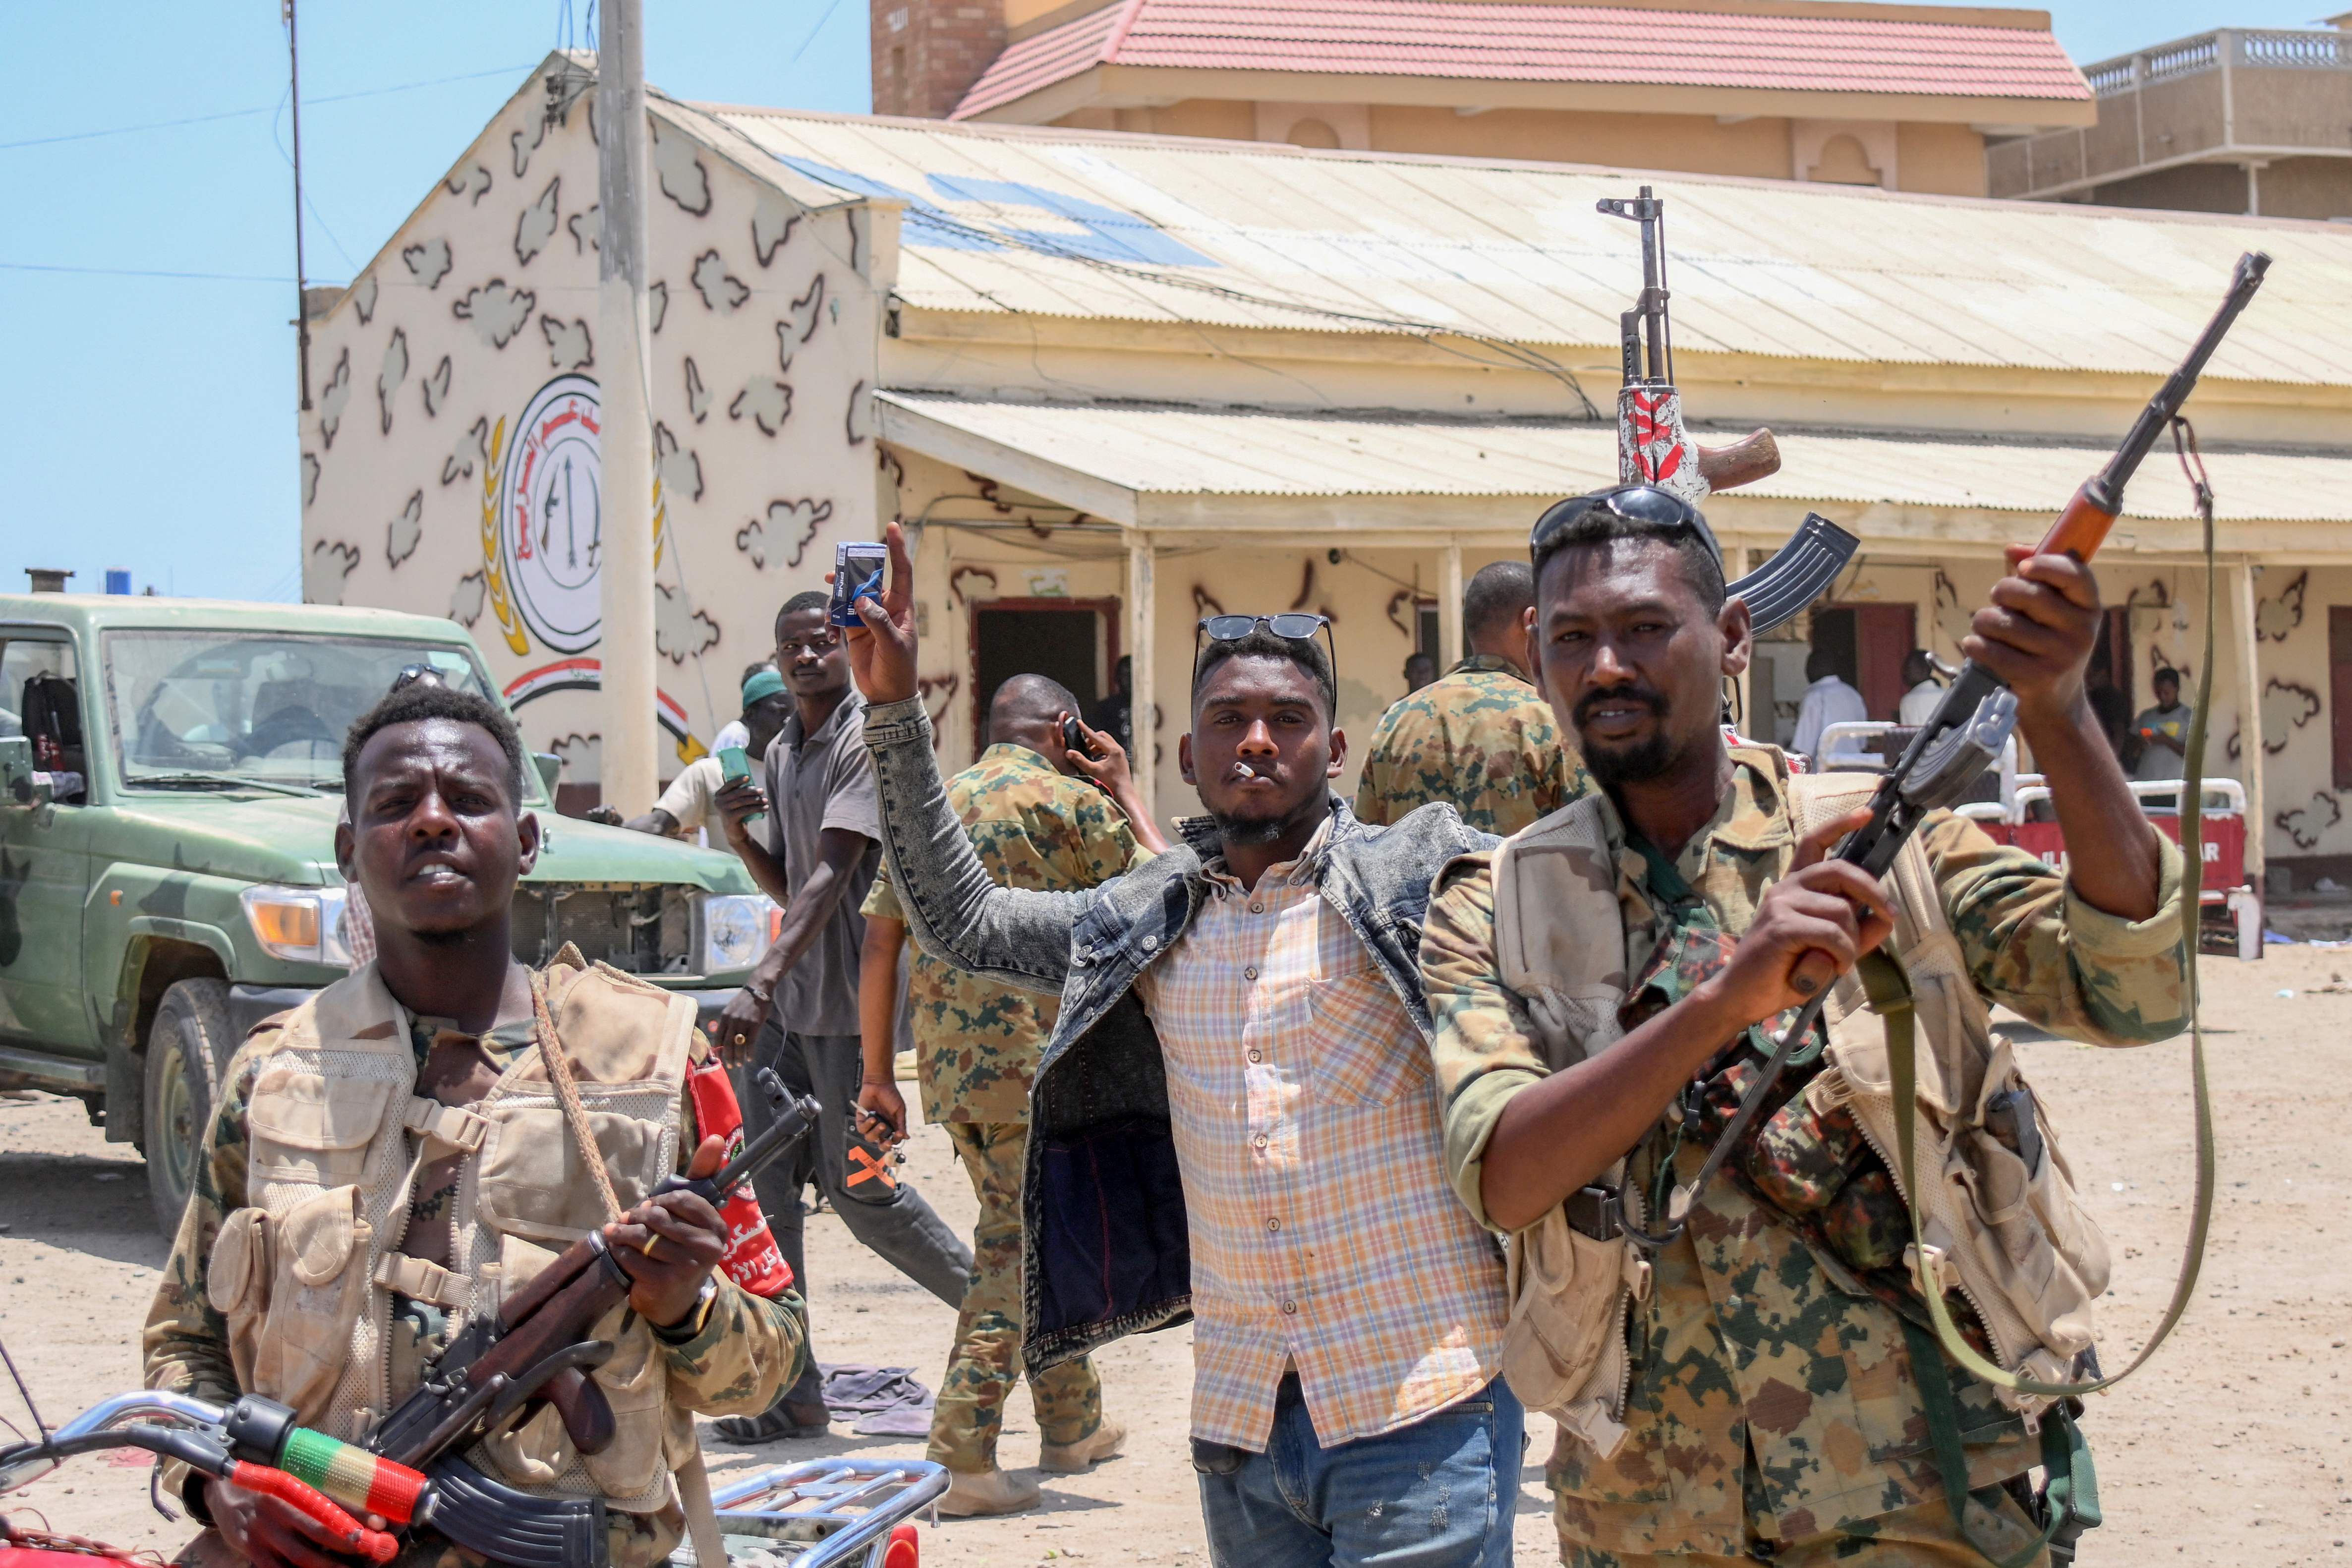 It is clear who would win a new conflict in Sudan: no-one